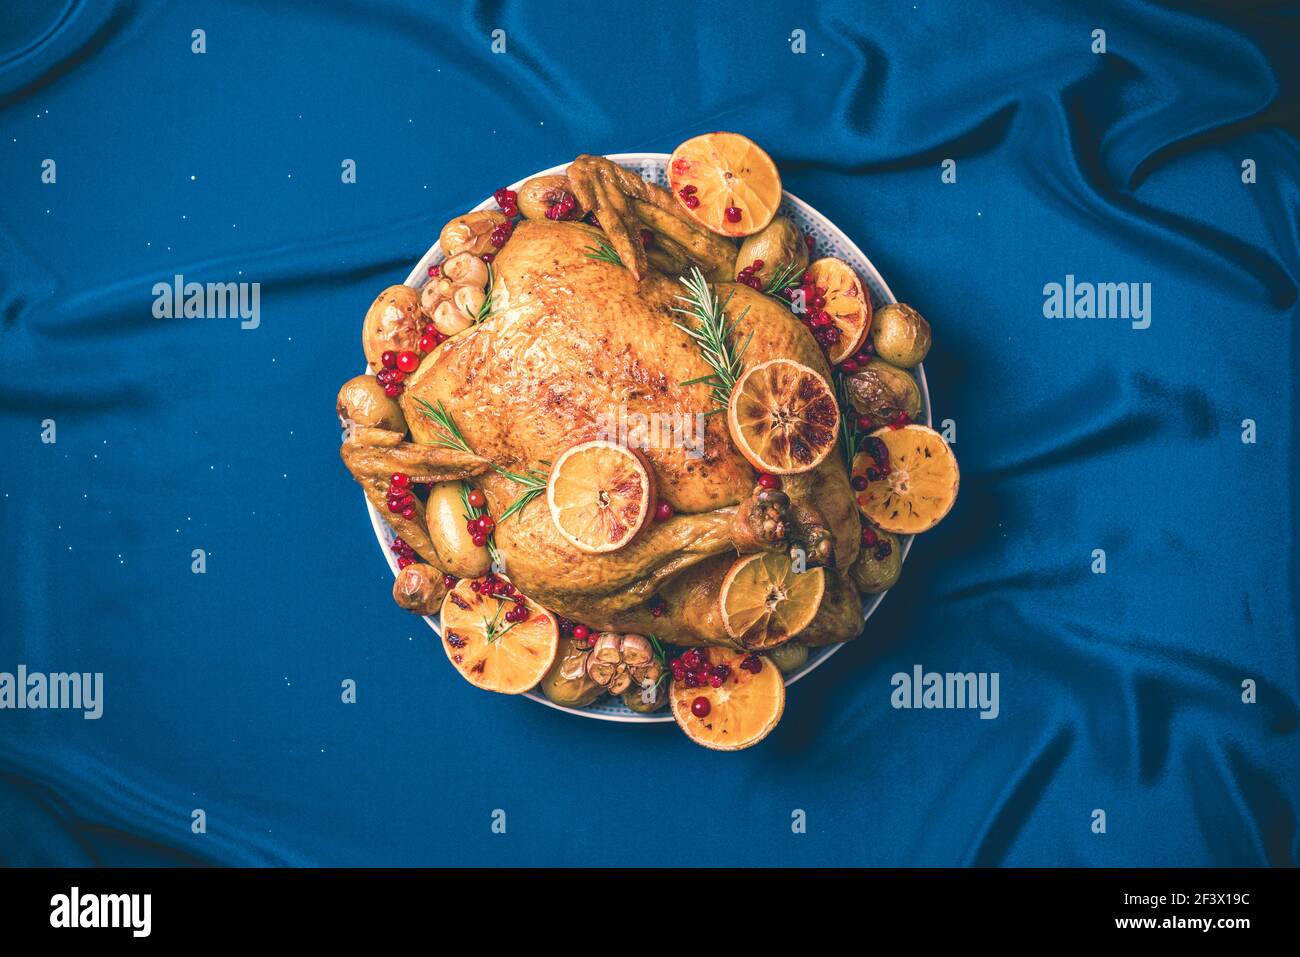 Roasted chicken with oranges, rosemary and cranberries on plate over concrete background. Traditional Thanksgiving or Friendsgiving holiday Stock Photo